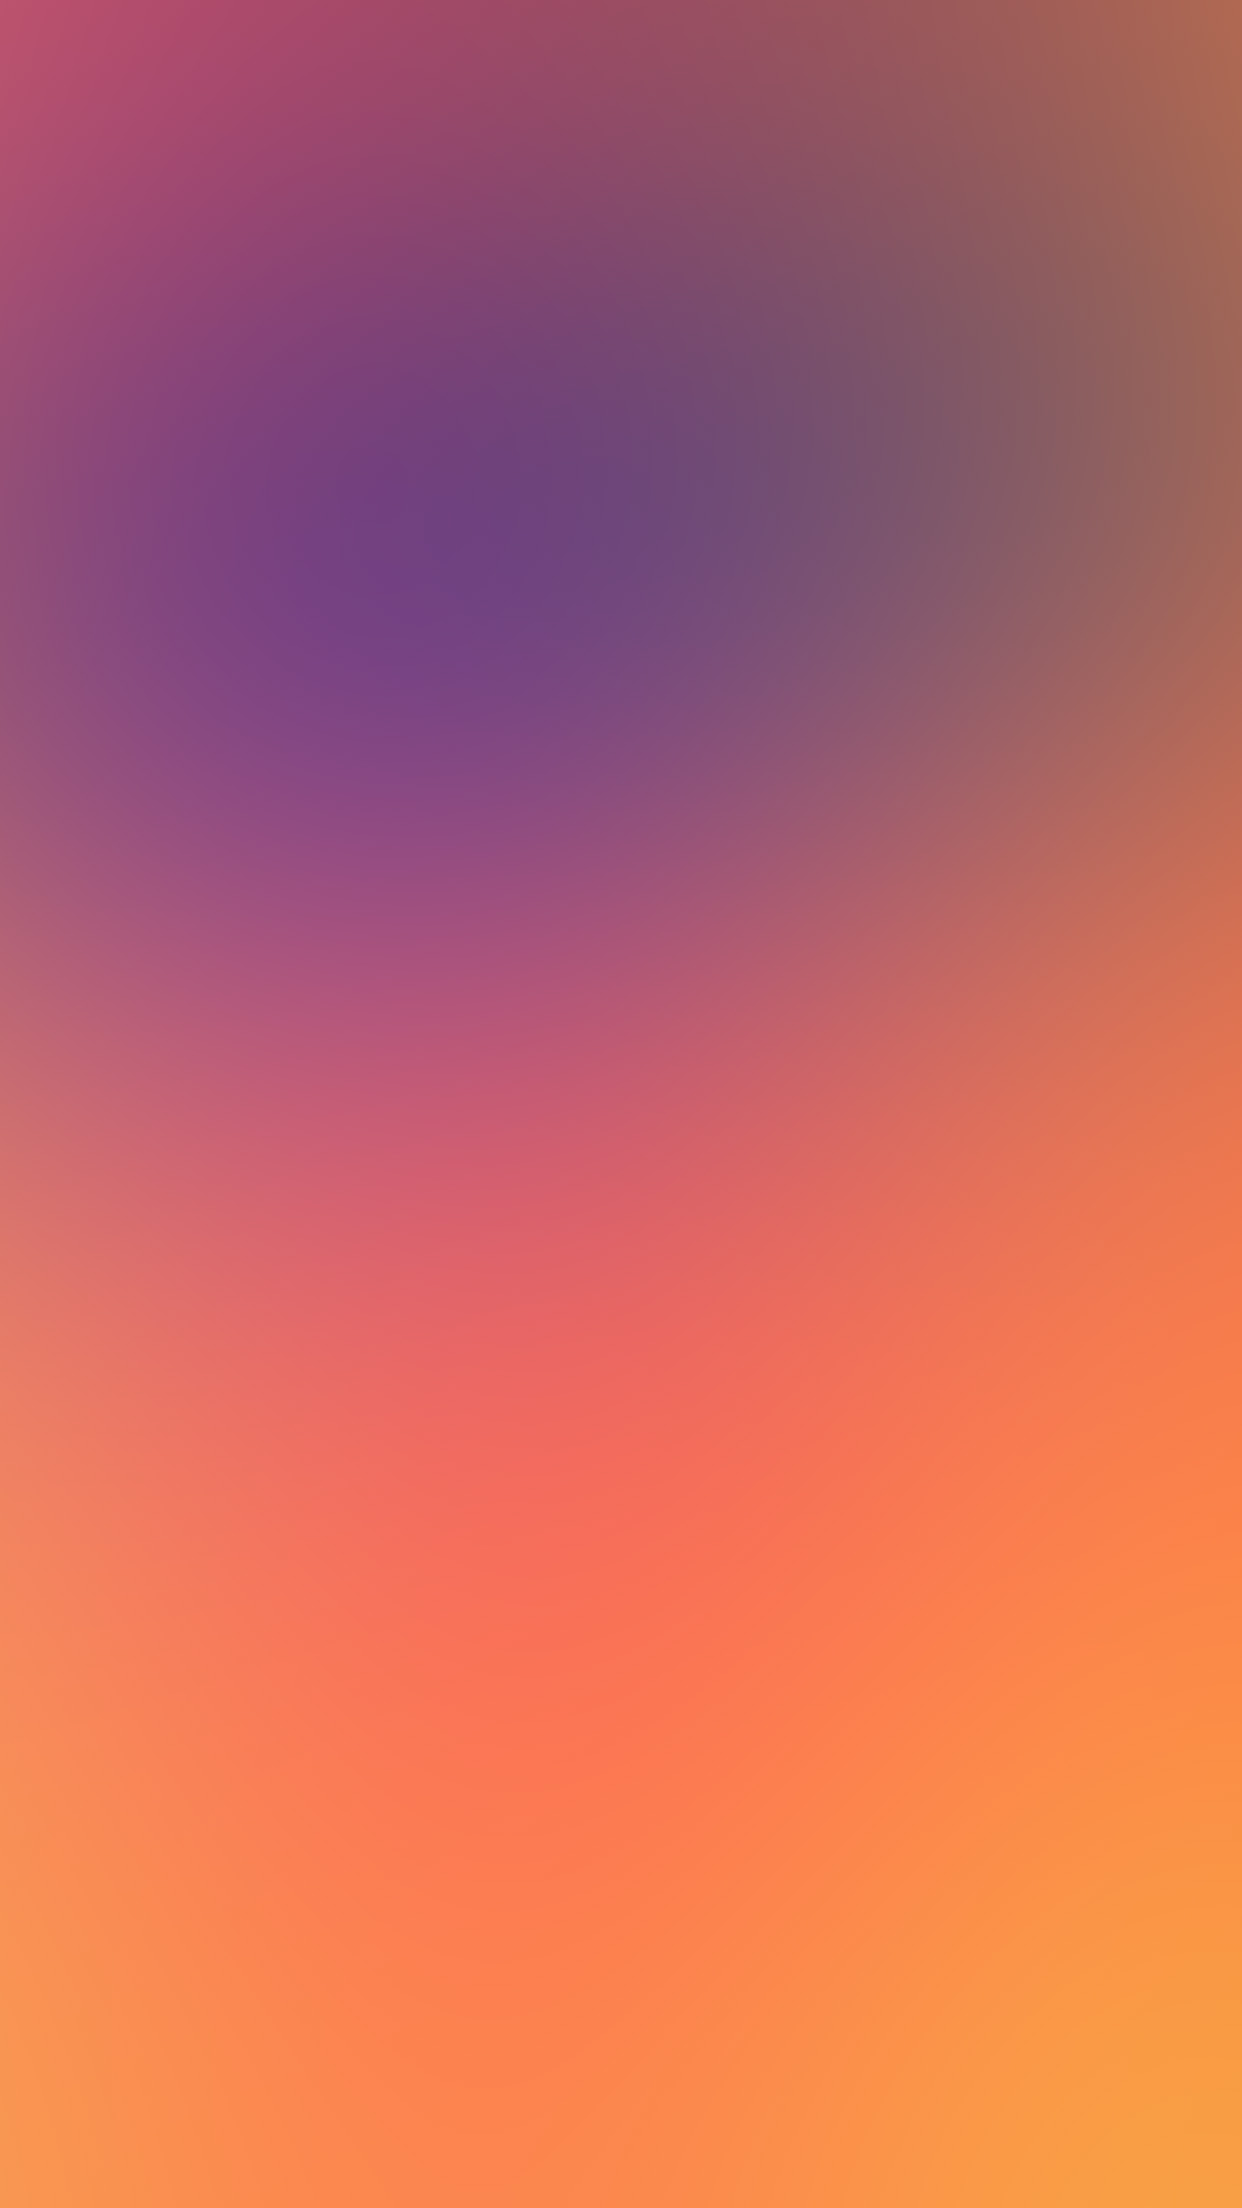 Rainbow Blurry Wallpaper For Iphone 6 , HD Wallpaper & Backgrounds